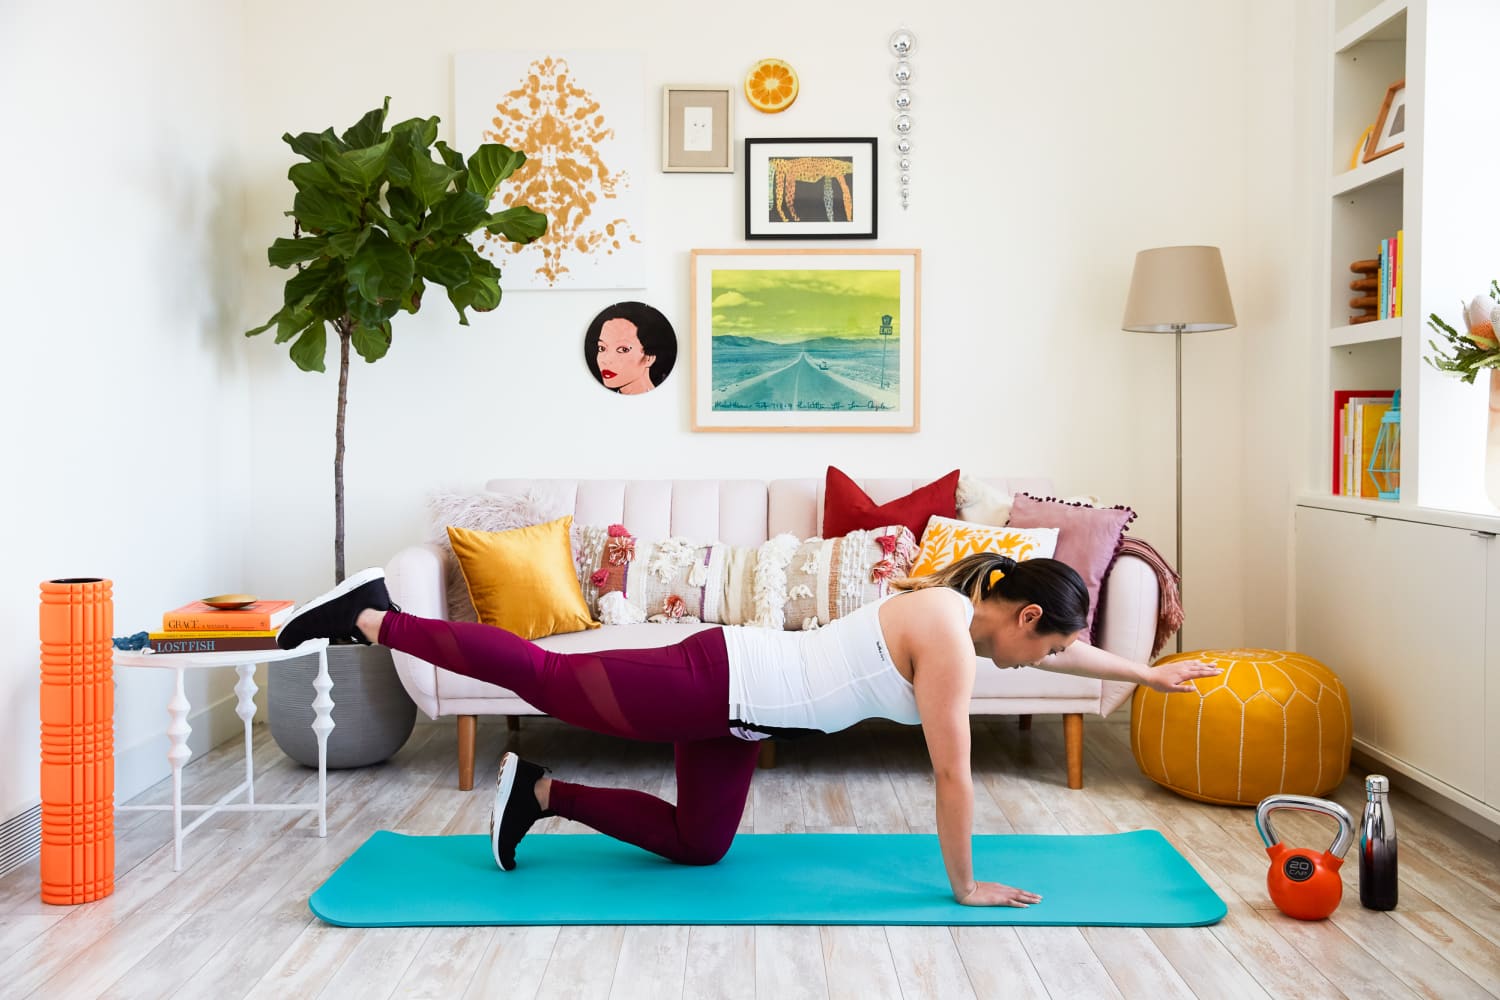 The Best Home Items To Use When You Don’t Have Workout Equipment, According to Fitness Experts